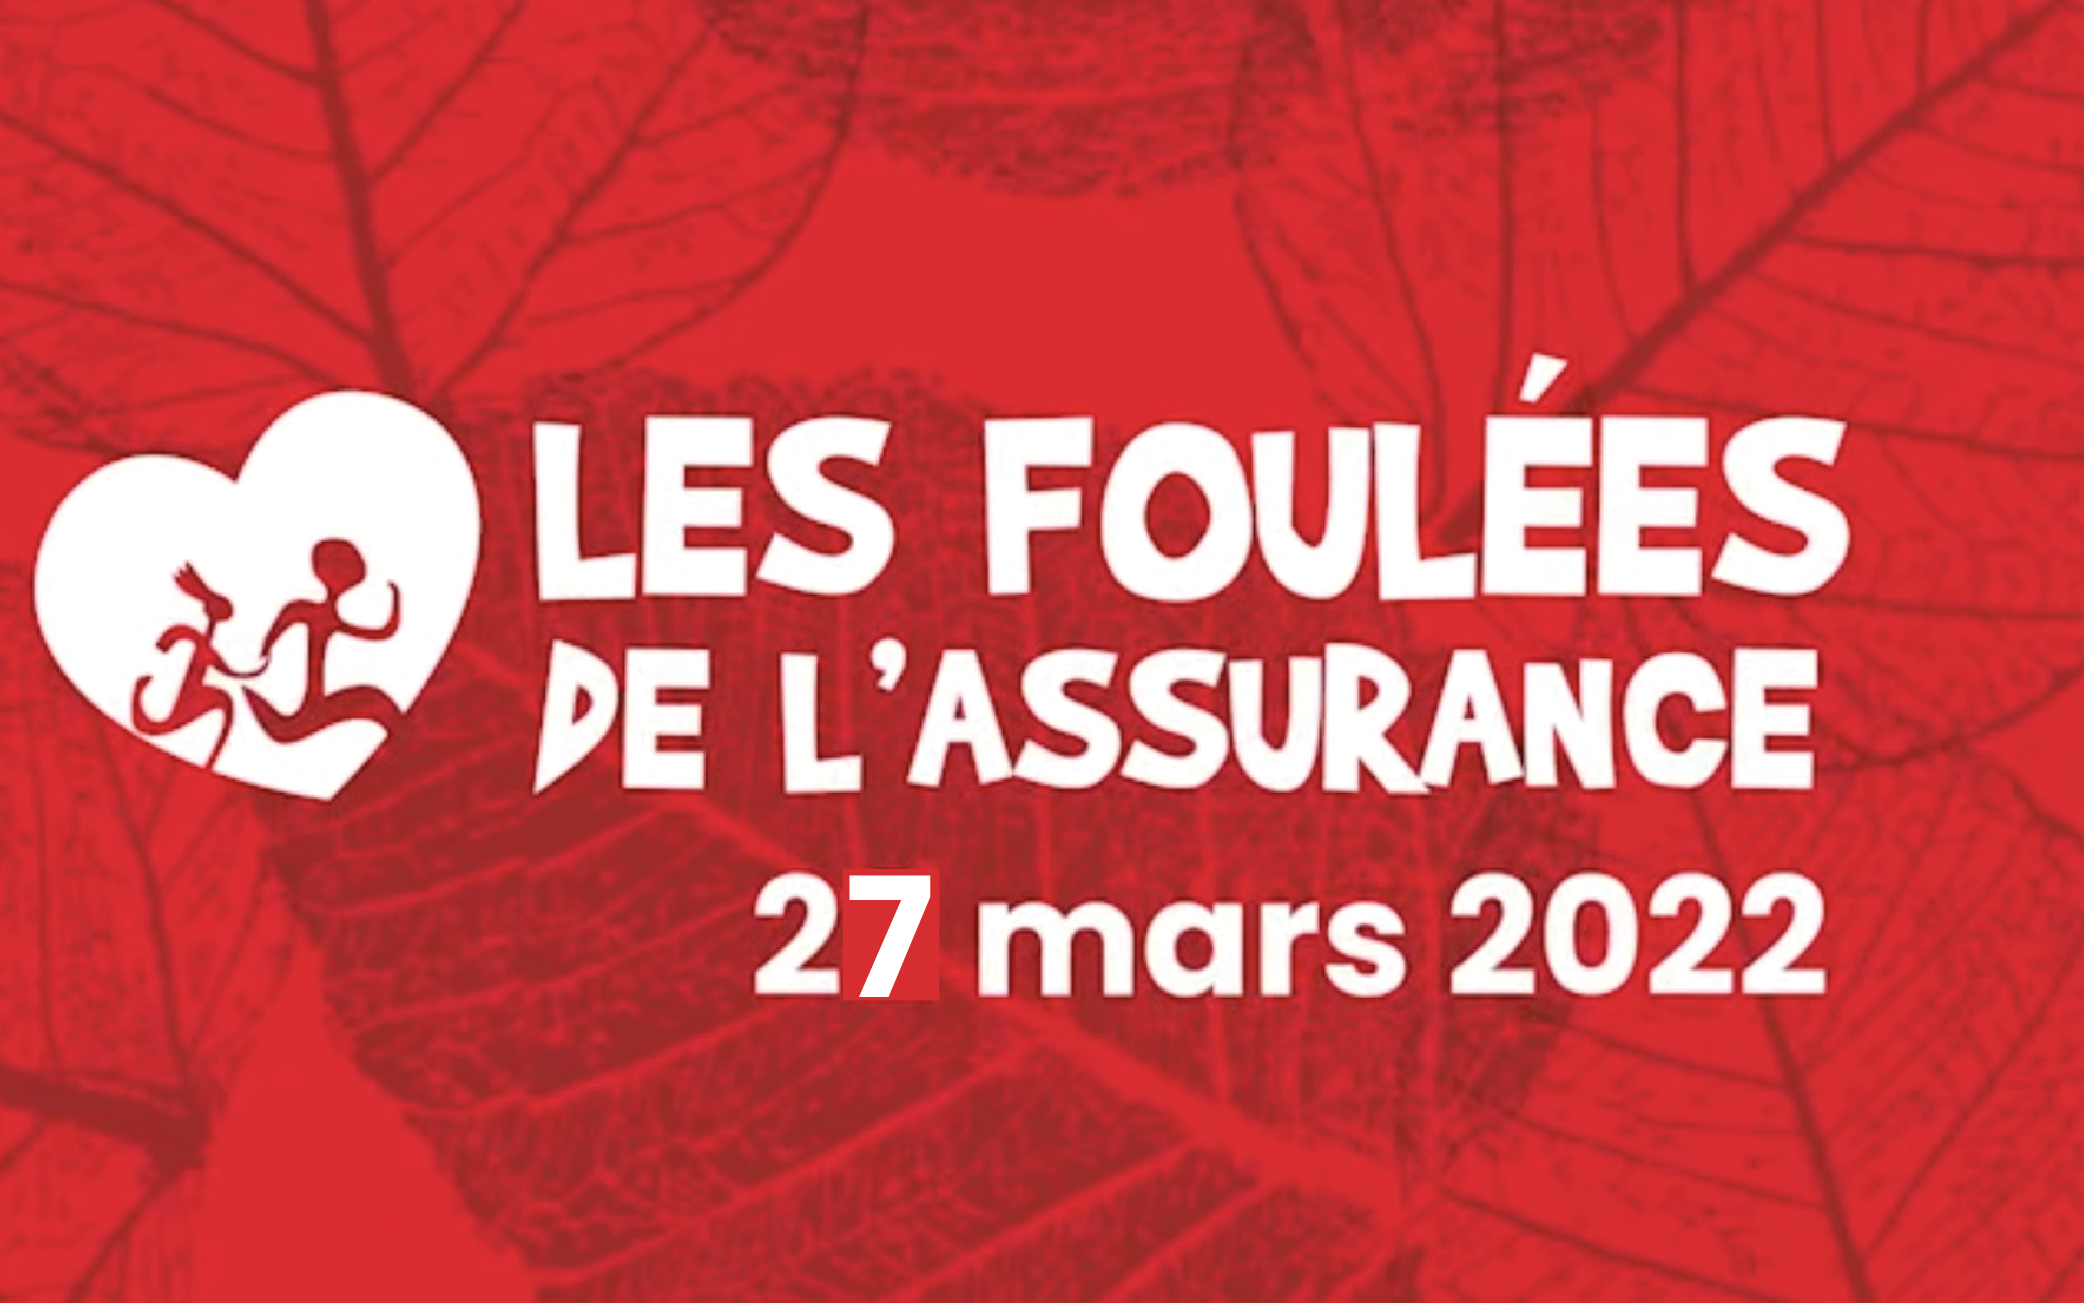 https://www.emargence.fr/wp-content/uploads/2022/01/ACTU-site_FOULEES-2022.png